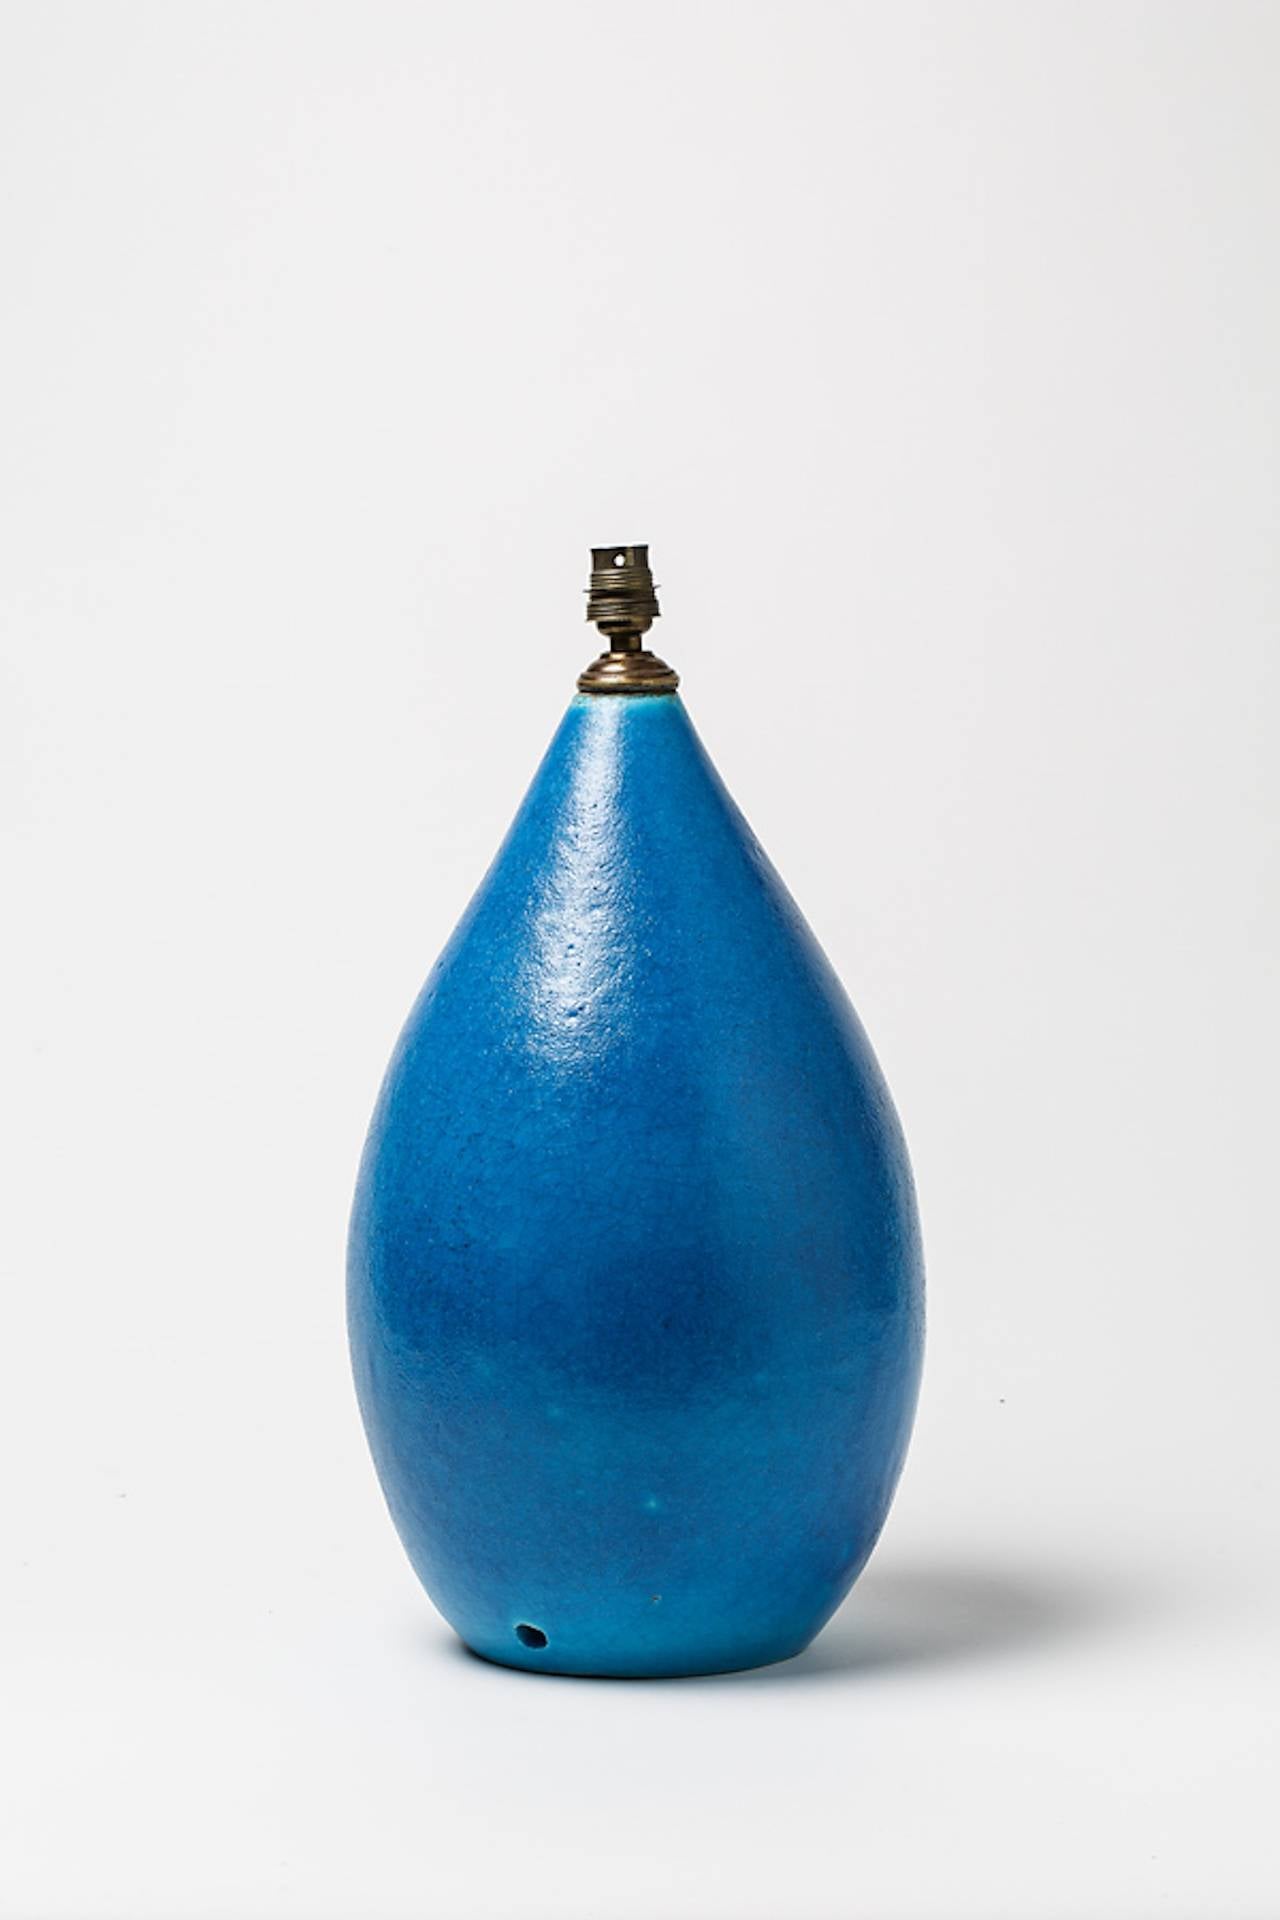 Turned Blue Ceramic Lamp by Raoul Lachenal, circa 1930-1940